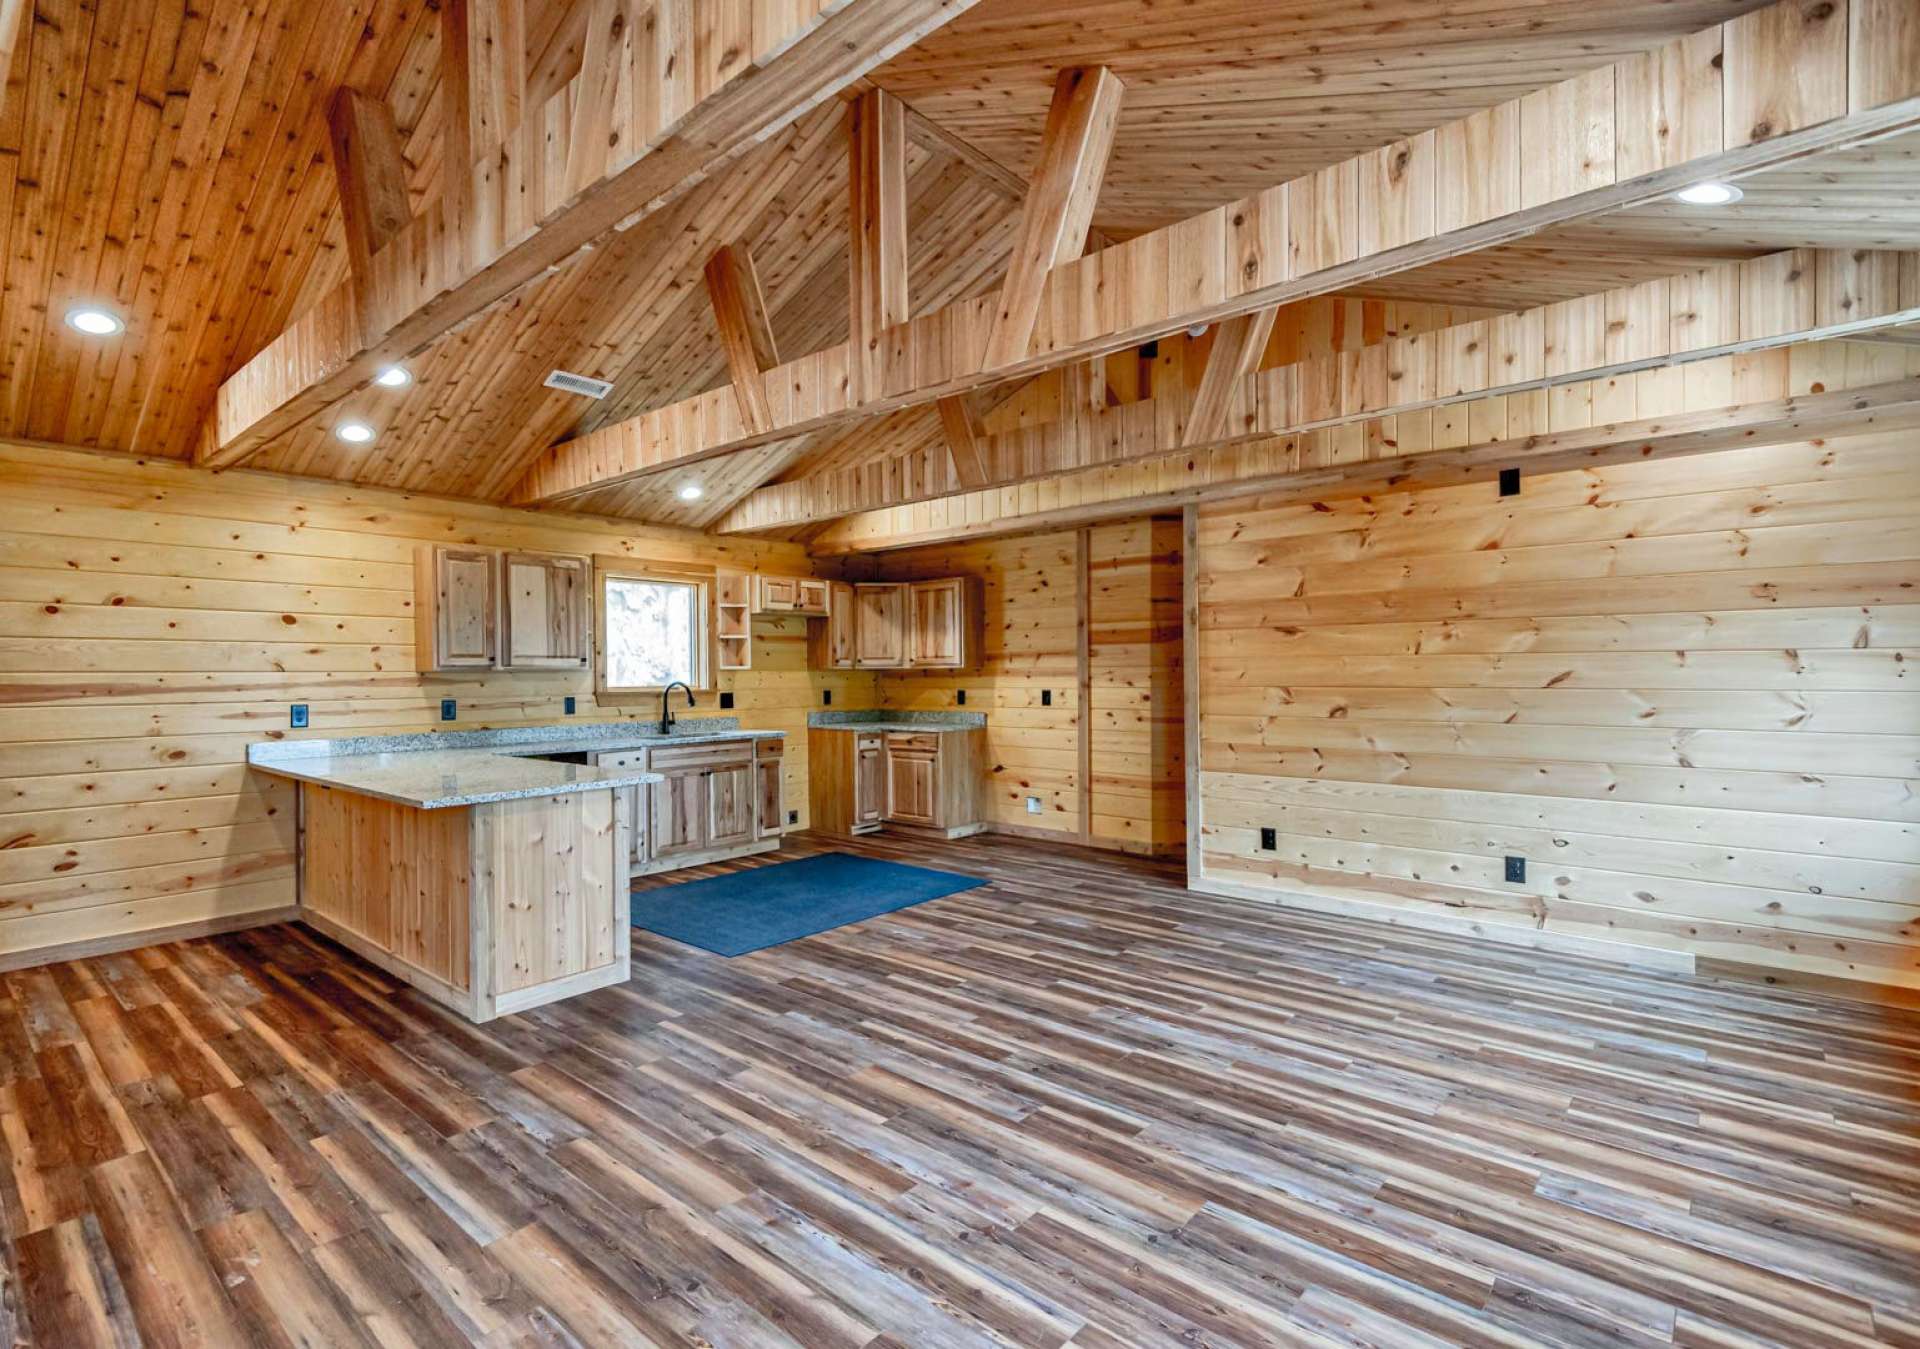 The cabin is quality built with many custom details including cedar ceilings and cedar exposed beams both inside and out as well as cedar shake siding.